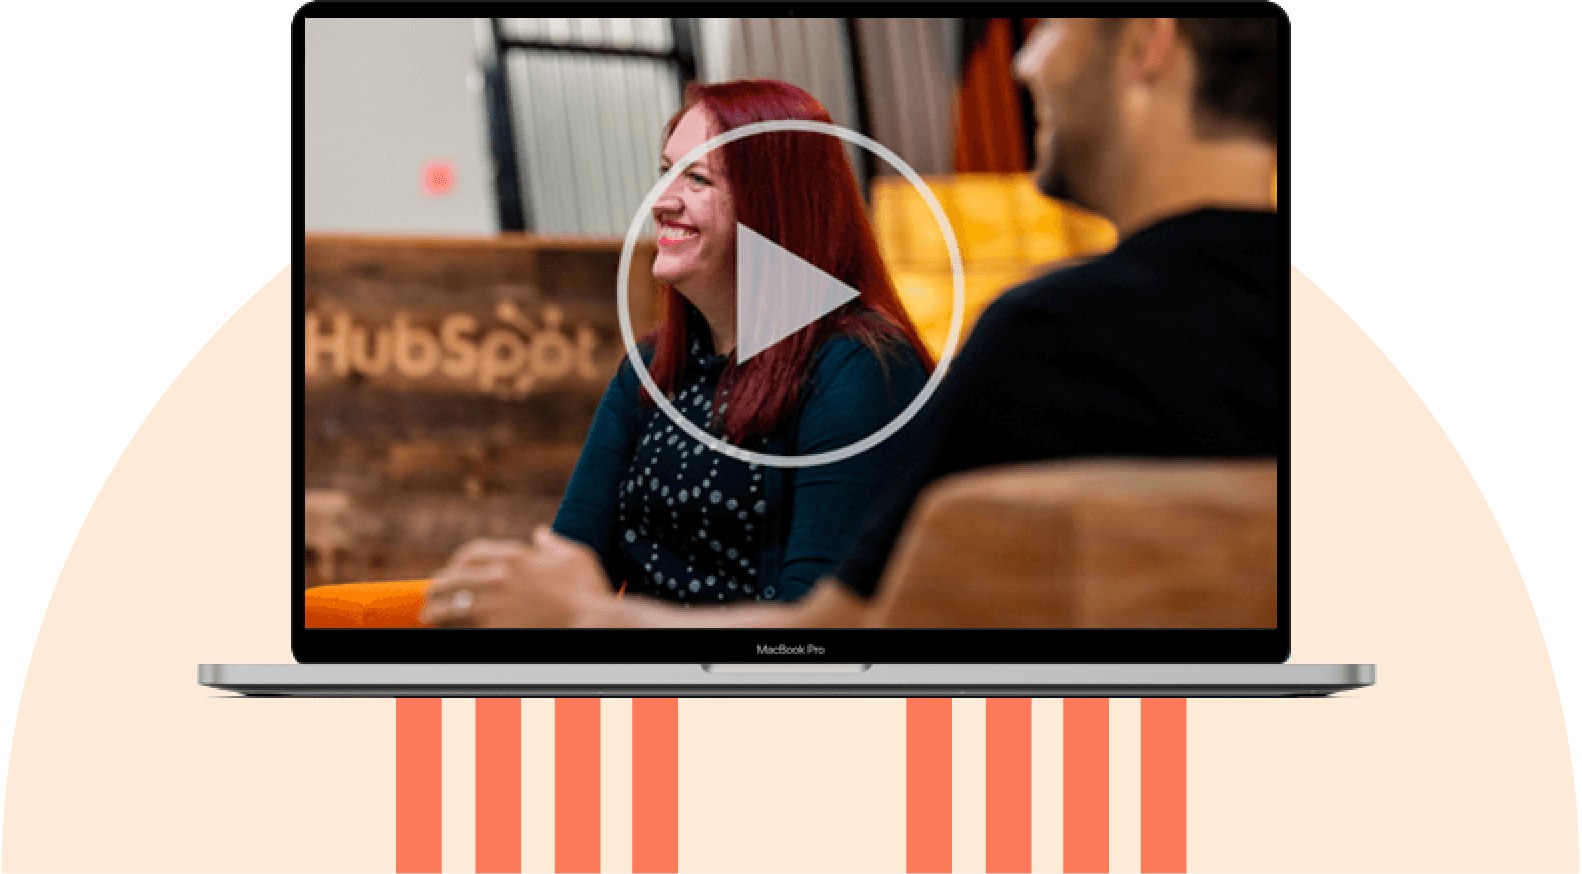 Watch this video to see what's new at HubSpot